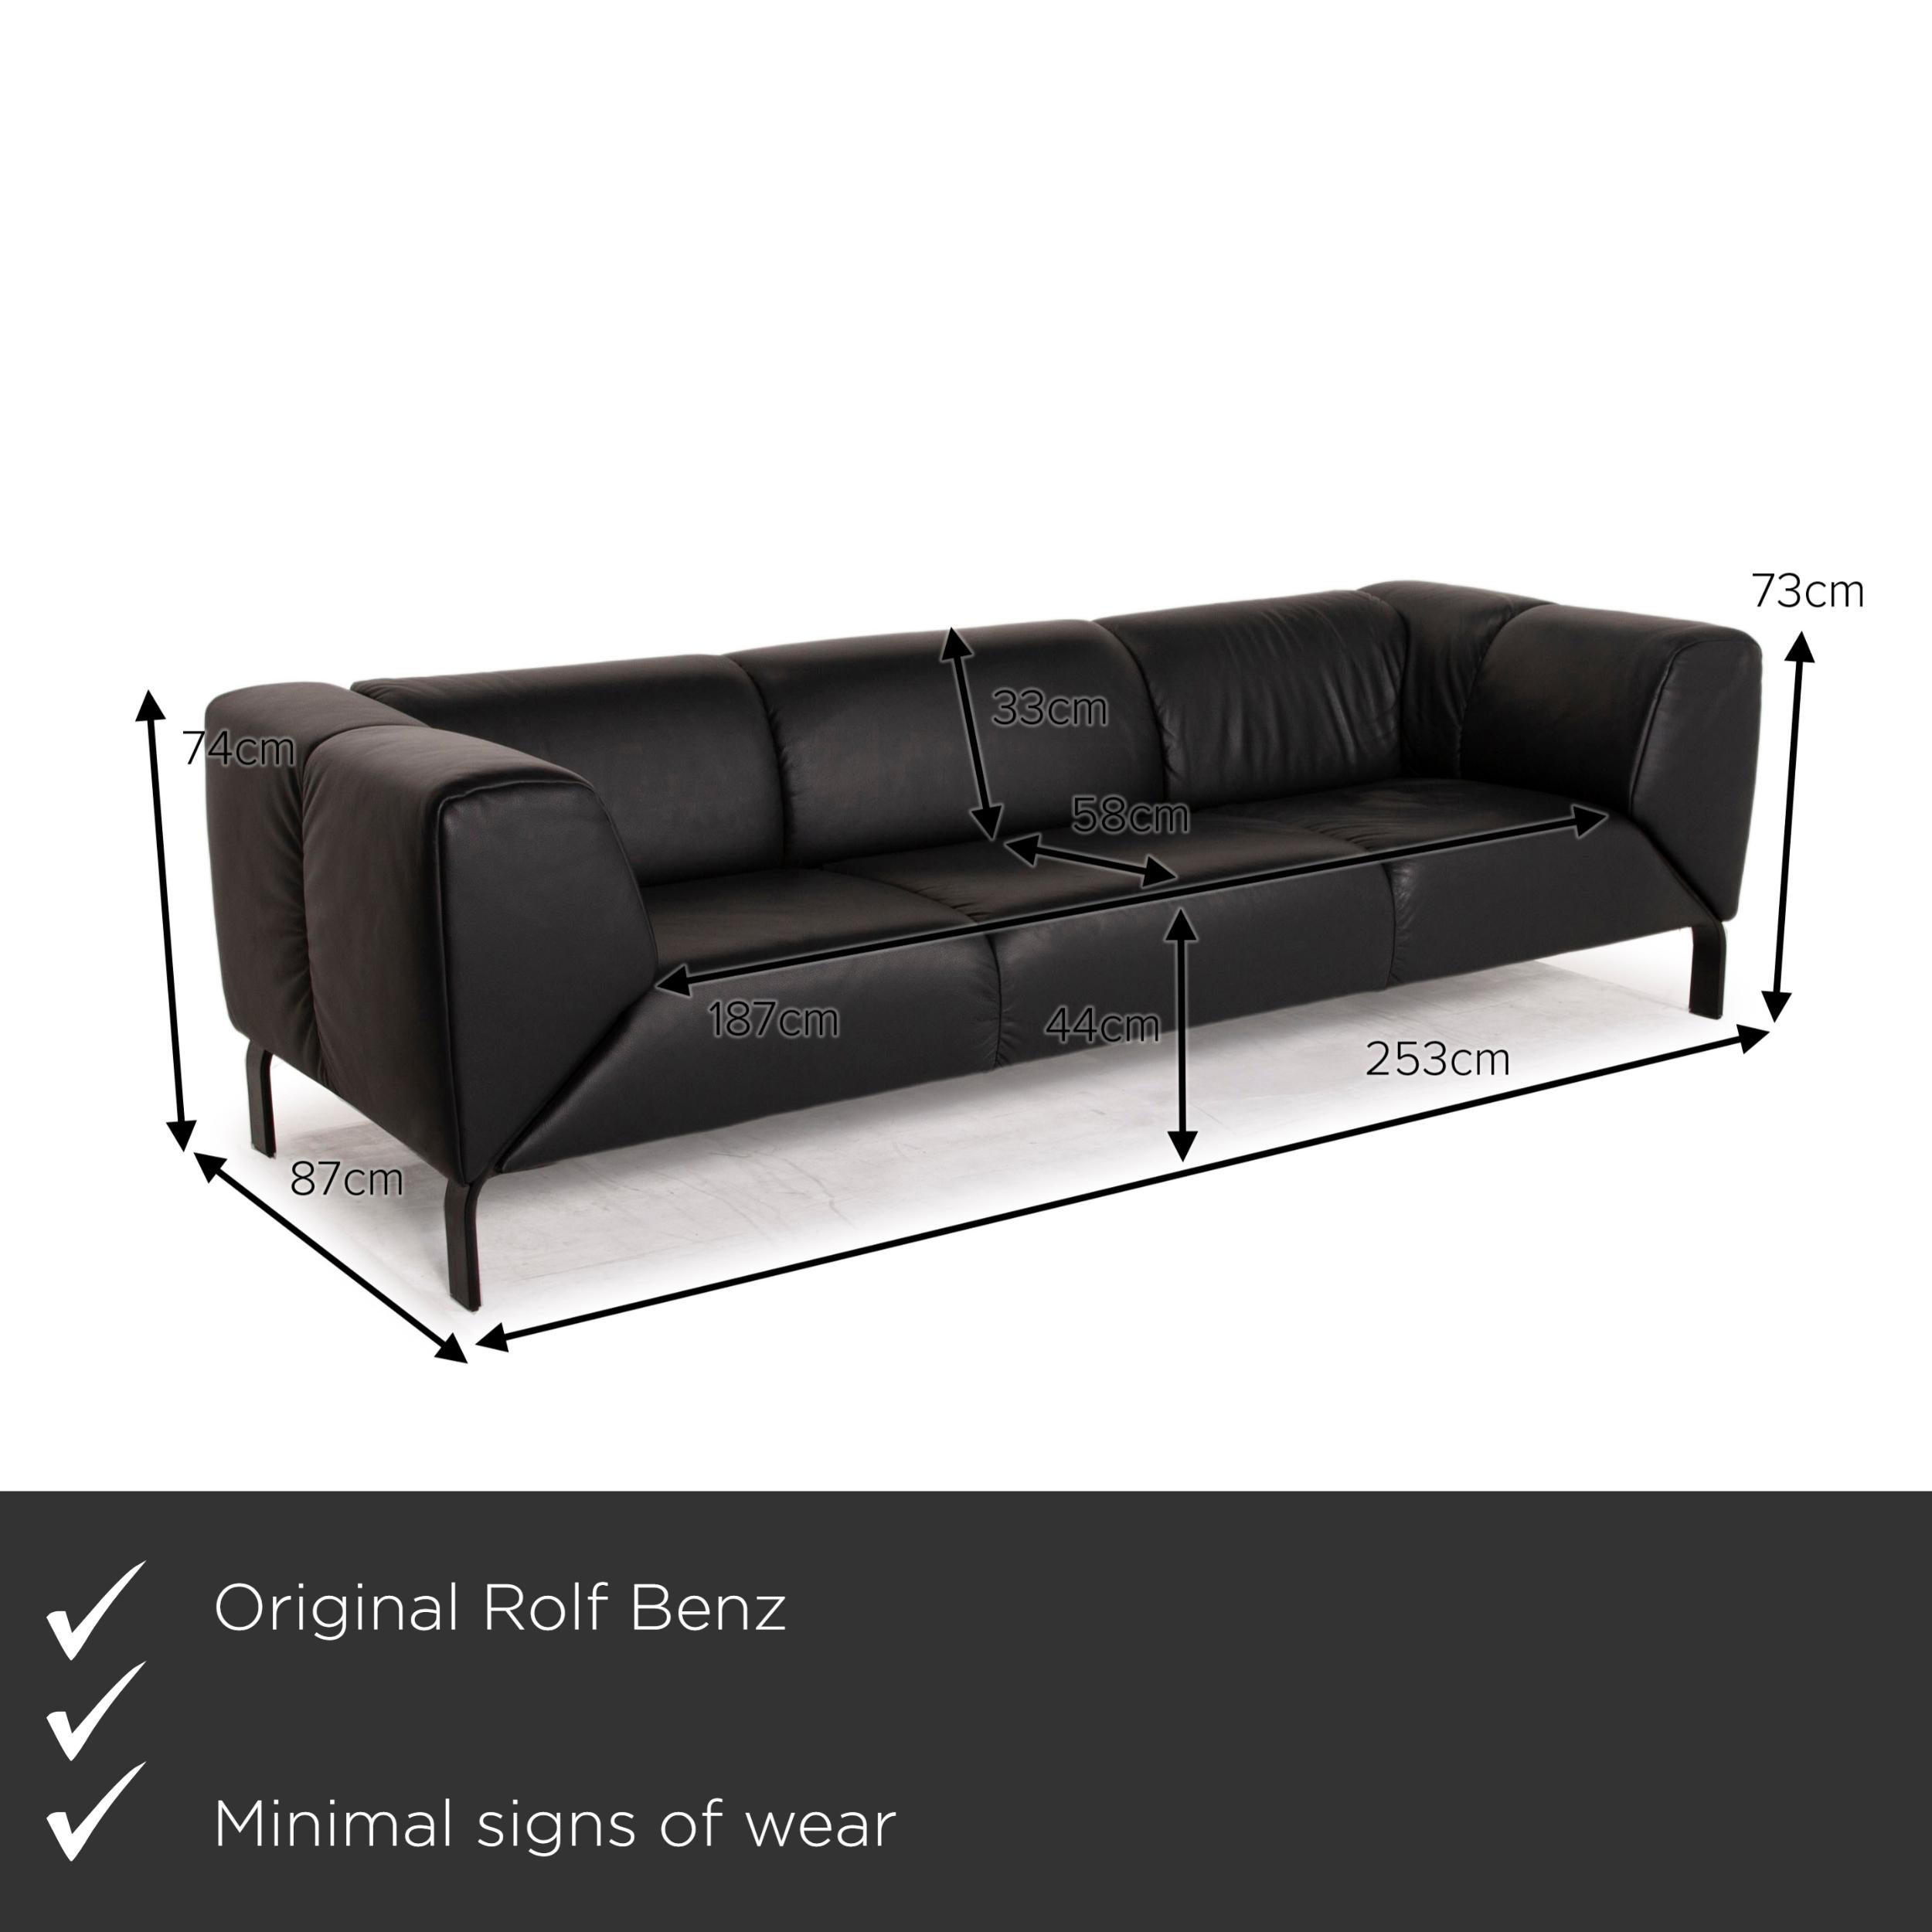 We present to you a Rolf Benz 323 leather sofa black three-seater.
 

 Product measurements in centimeters:
 

Depth: 87
Width: 253
Height: 74
Seat height: 44
Rest height: 73
Seat depth: 58
Seat width: 187
Back height: 33.

 